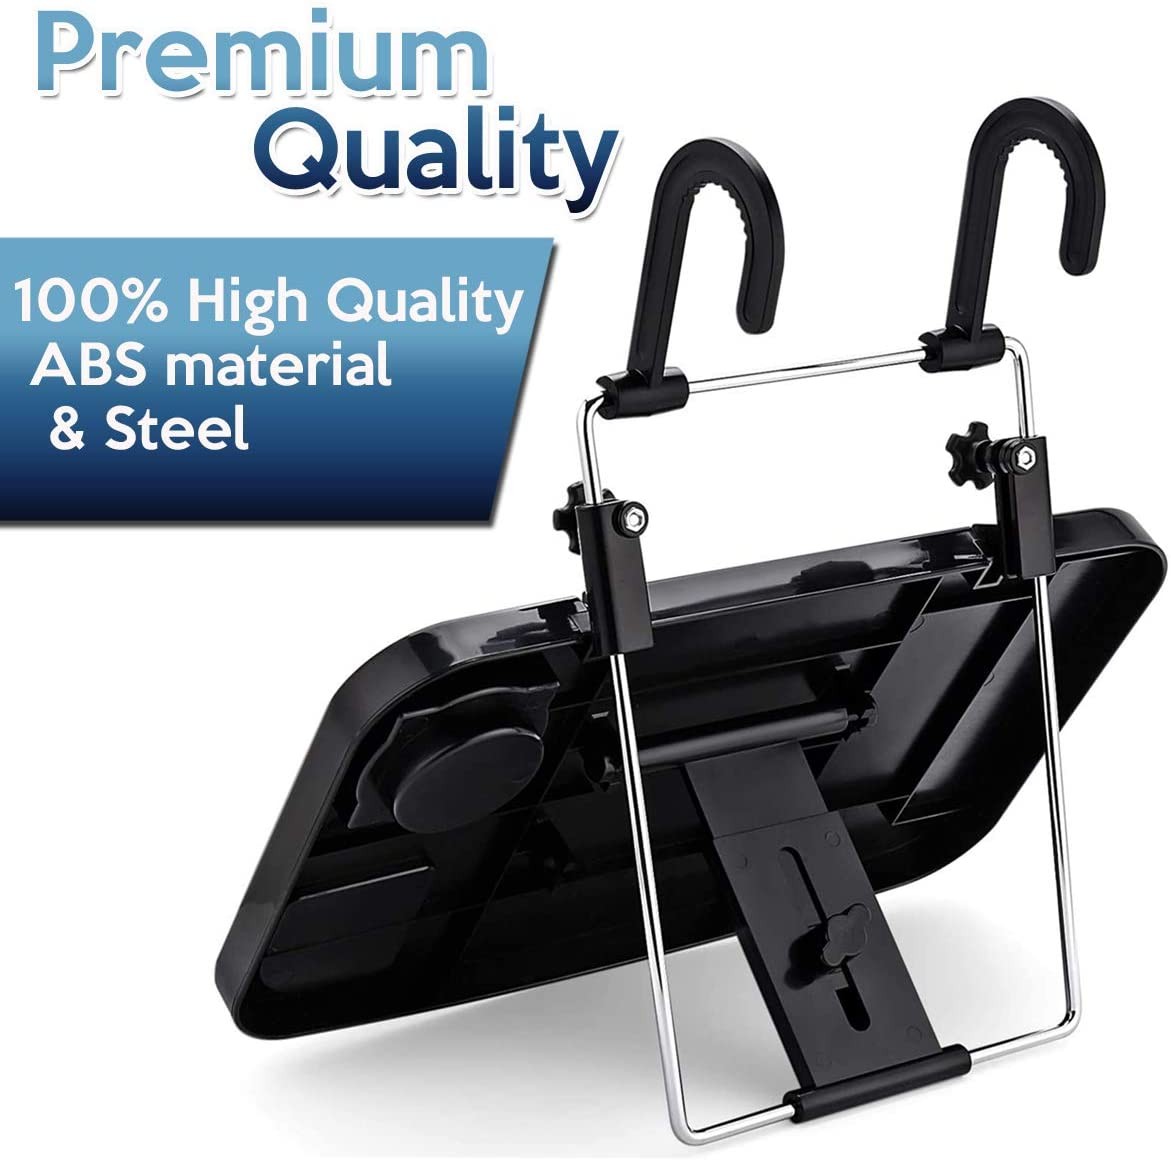 Car Seat Mount Tray Laptop PC Table Notebook Desk Food Table Portable Cup Holder